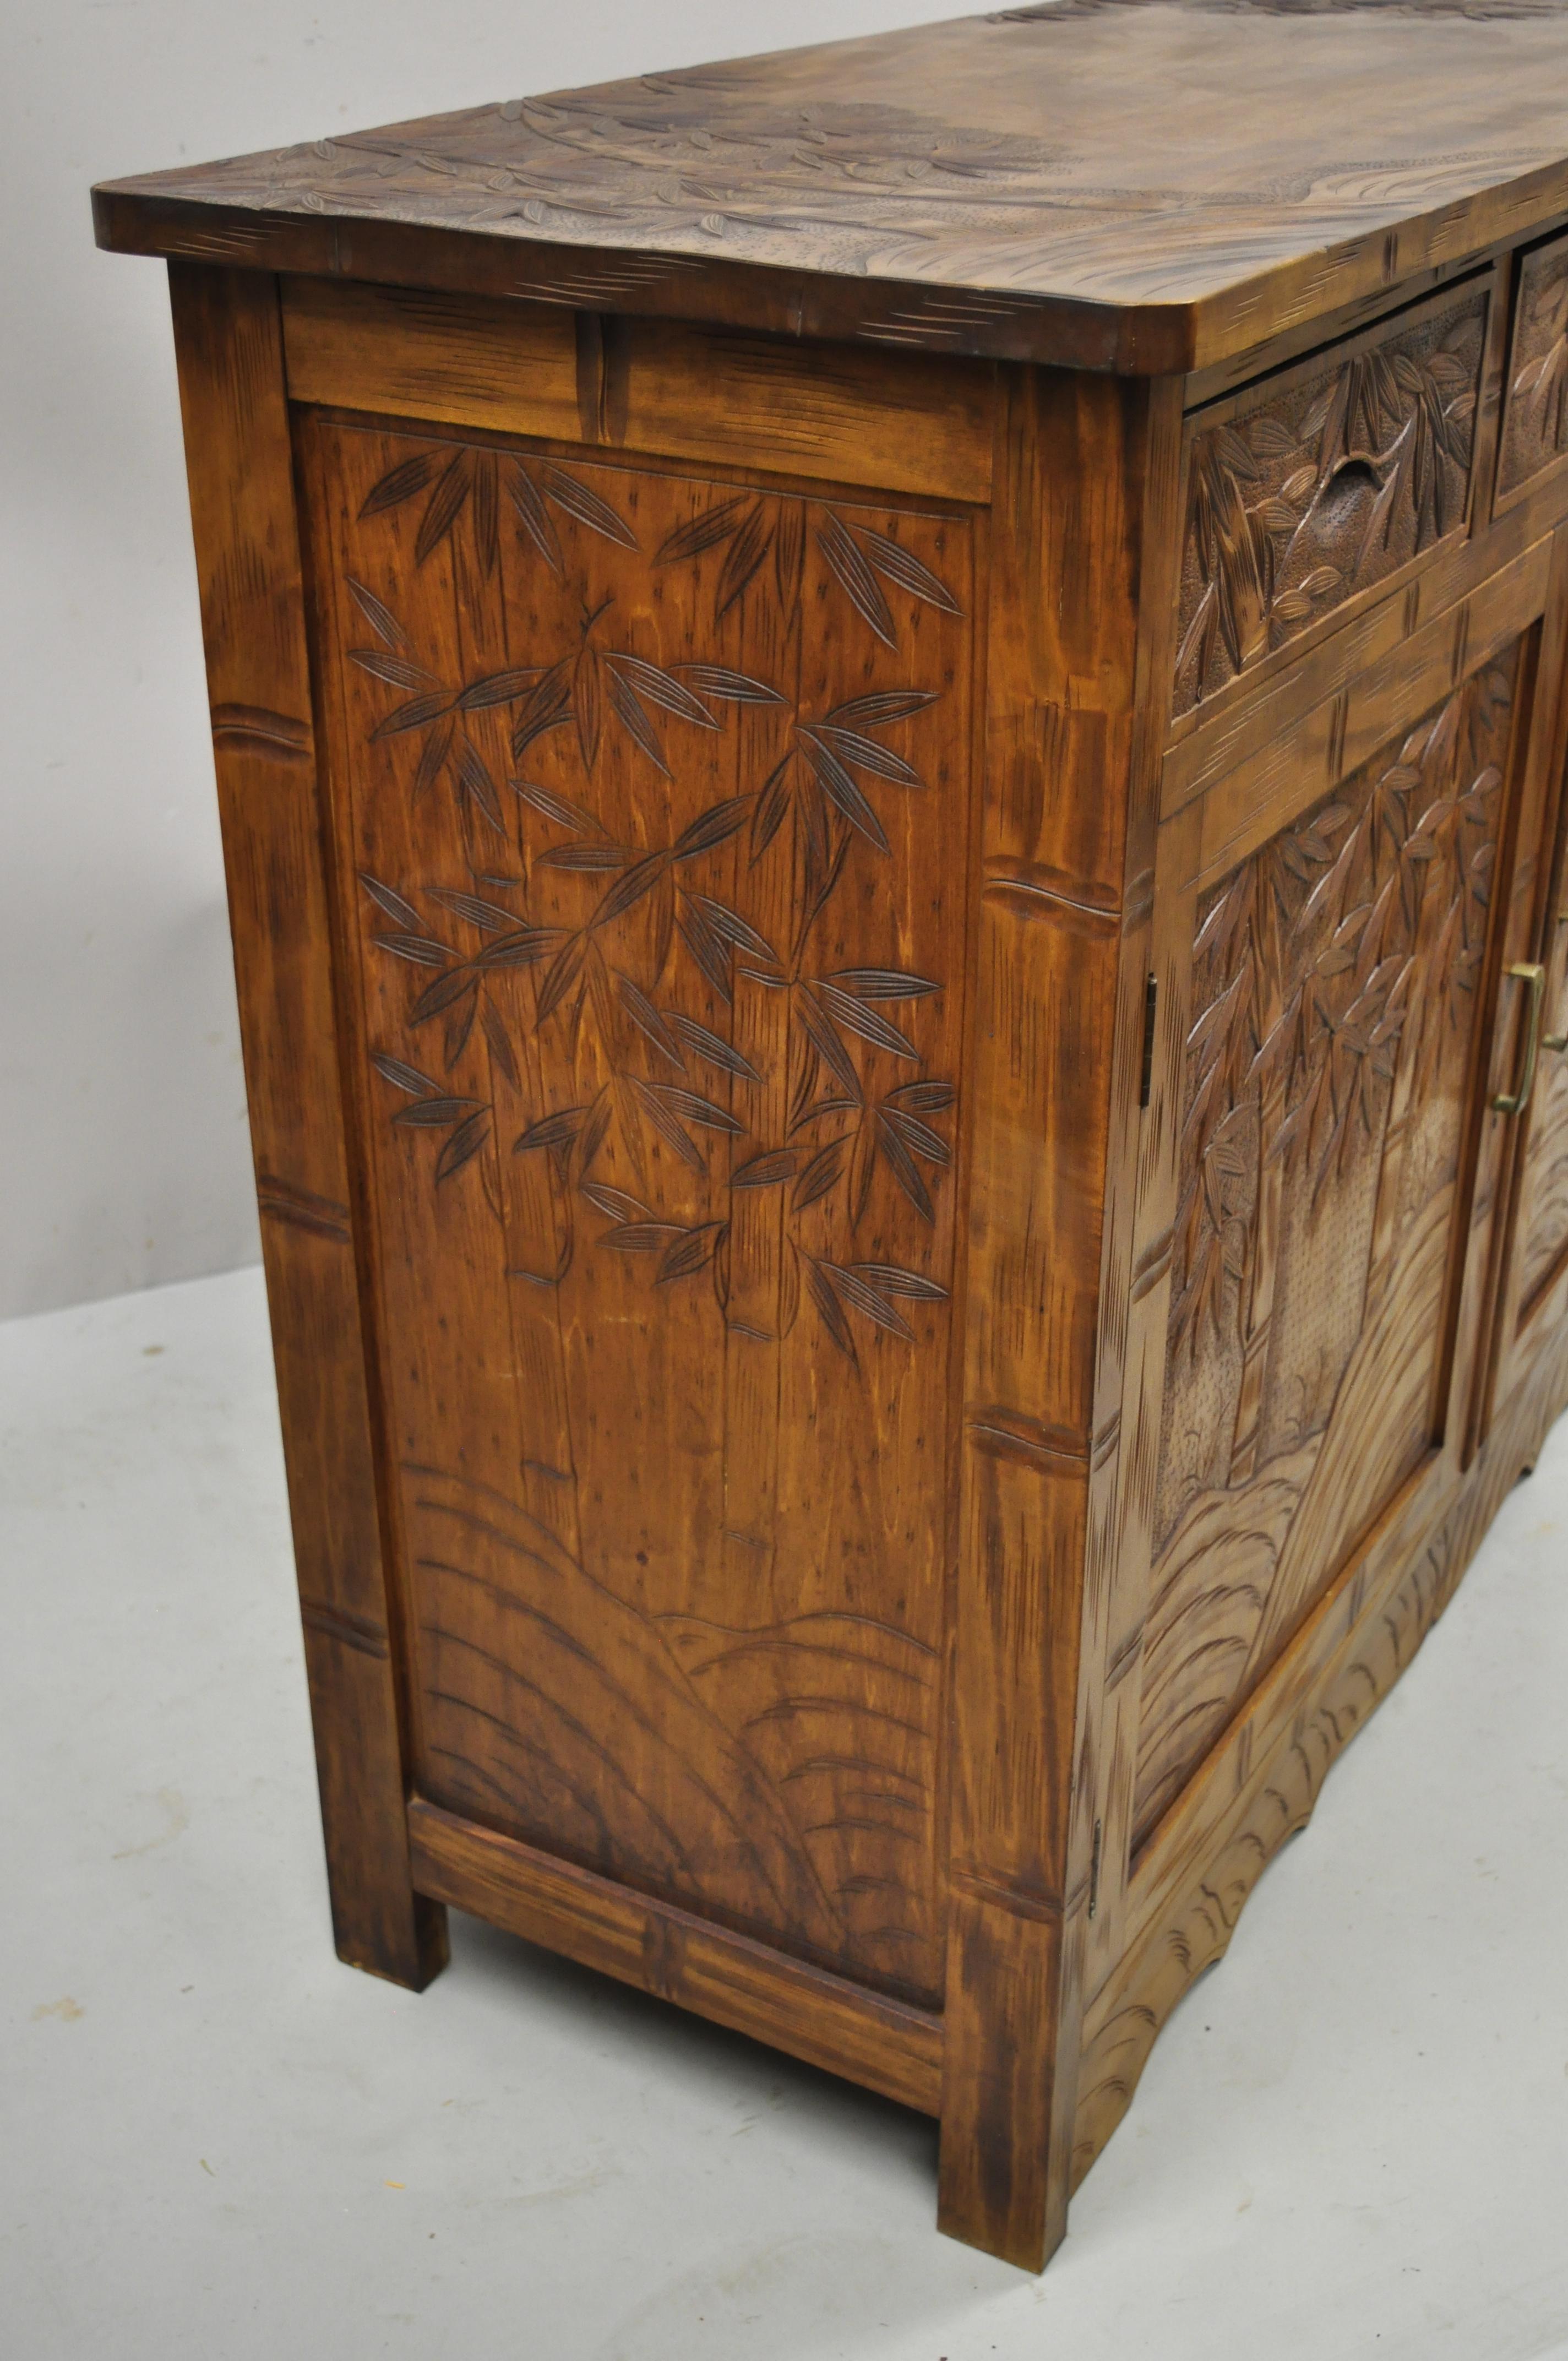 Vintage Chinese Teak Wood Carved Bamboo Tree Sideboard Buffet Cabinet 5